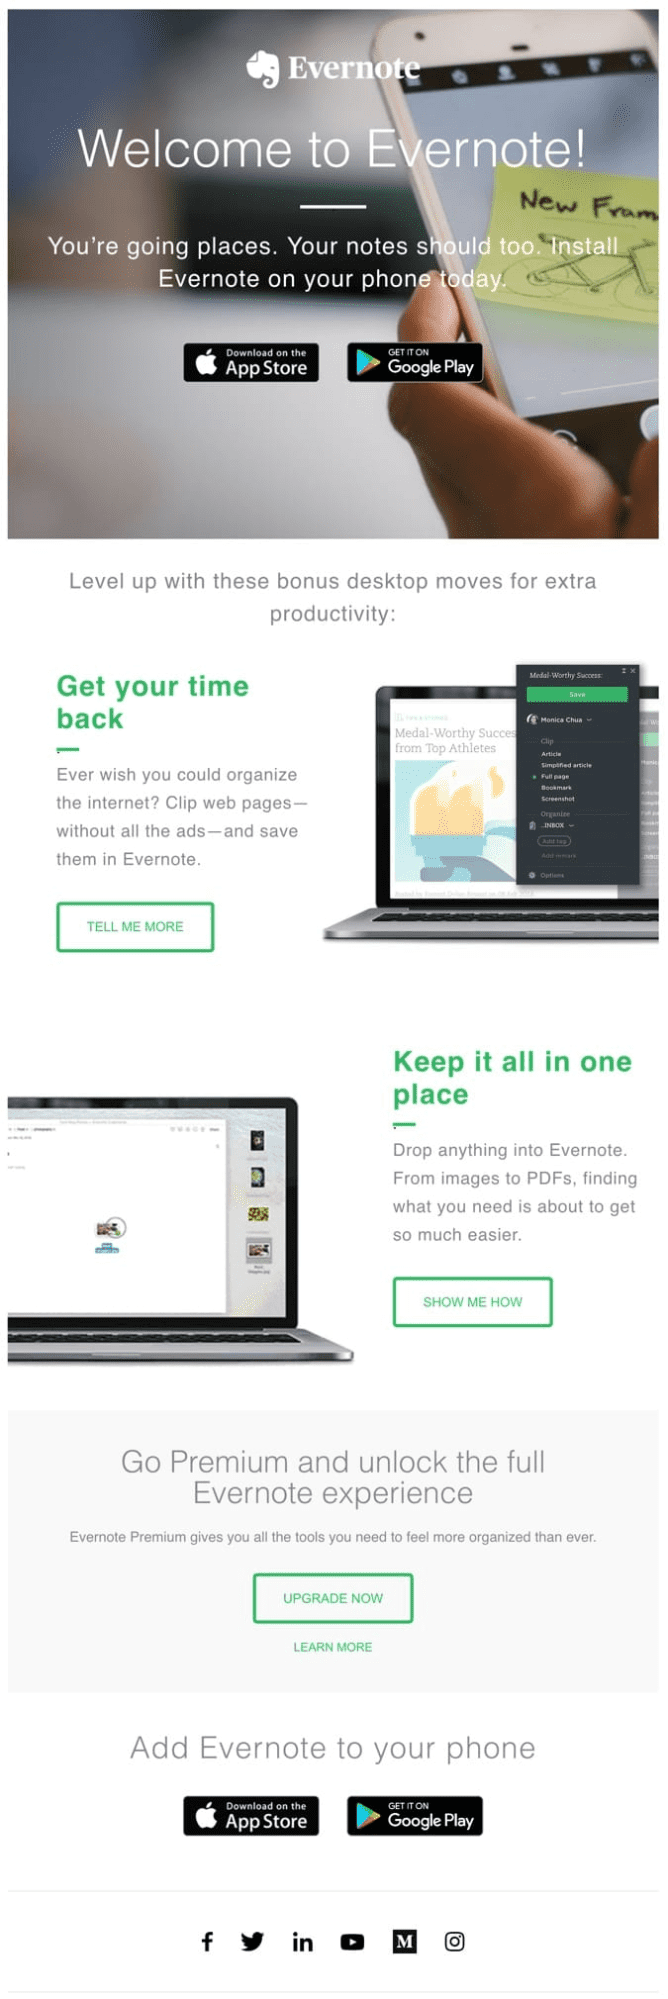 Evernote's welcome email